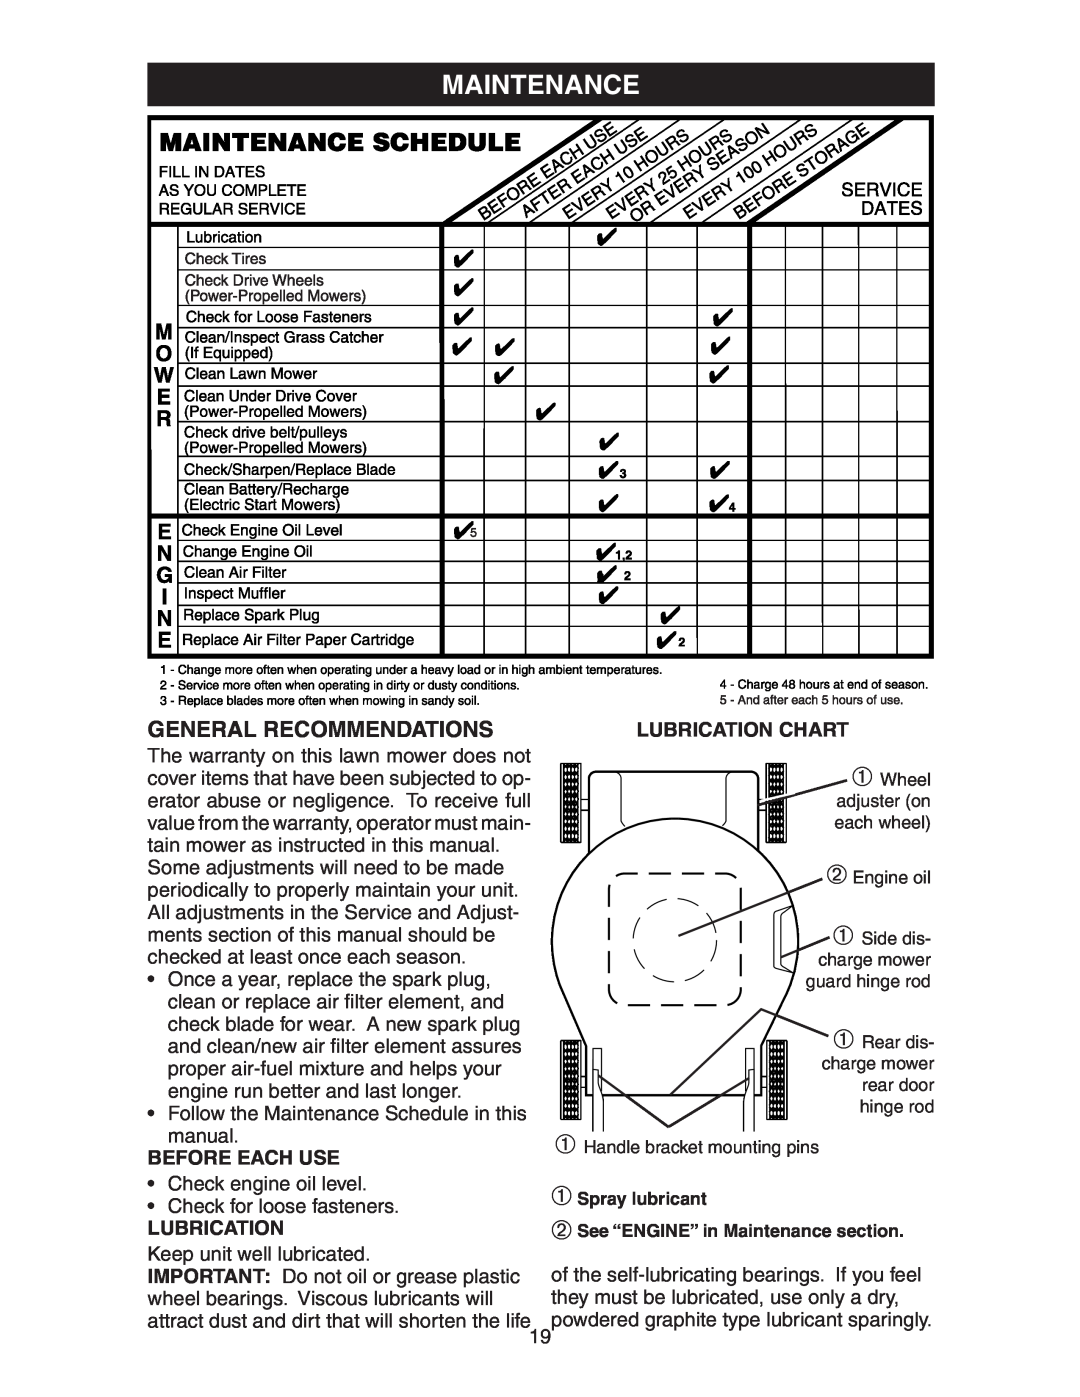 Poulan 172777 manual Maintenance, General Recommendations, Before Each Use, Lubrication Chart 